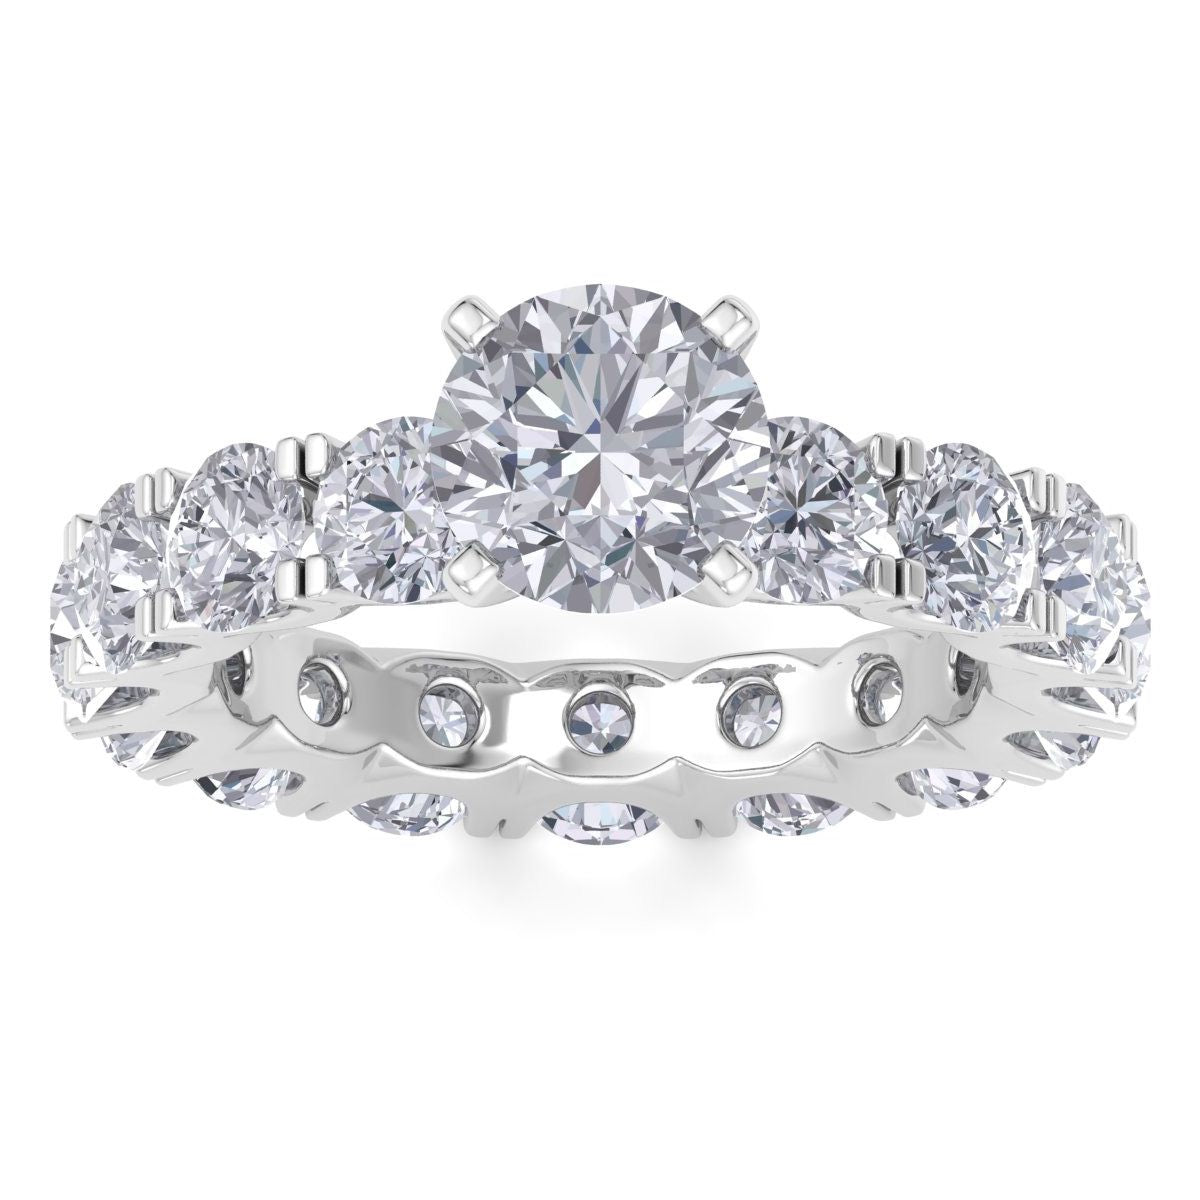 Shop Sselects 14 Karat White Gold 5 1/2 Carat Lab Grown Diamond Eternity Engagement Ring With 1 1/2 Carat Round Br In Silver